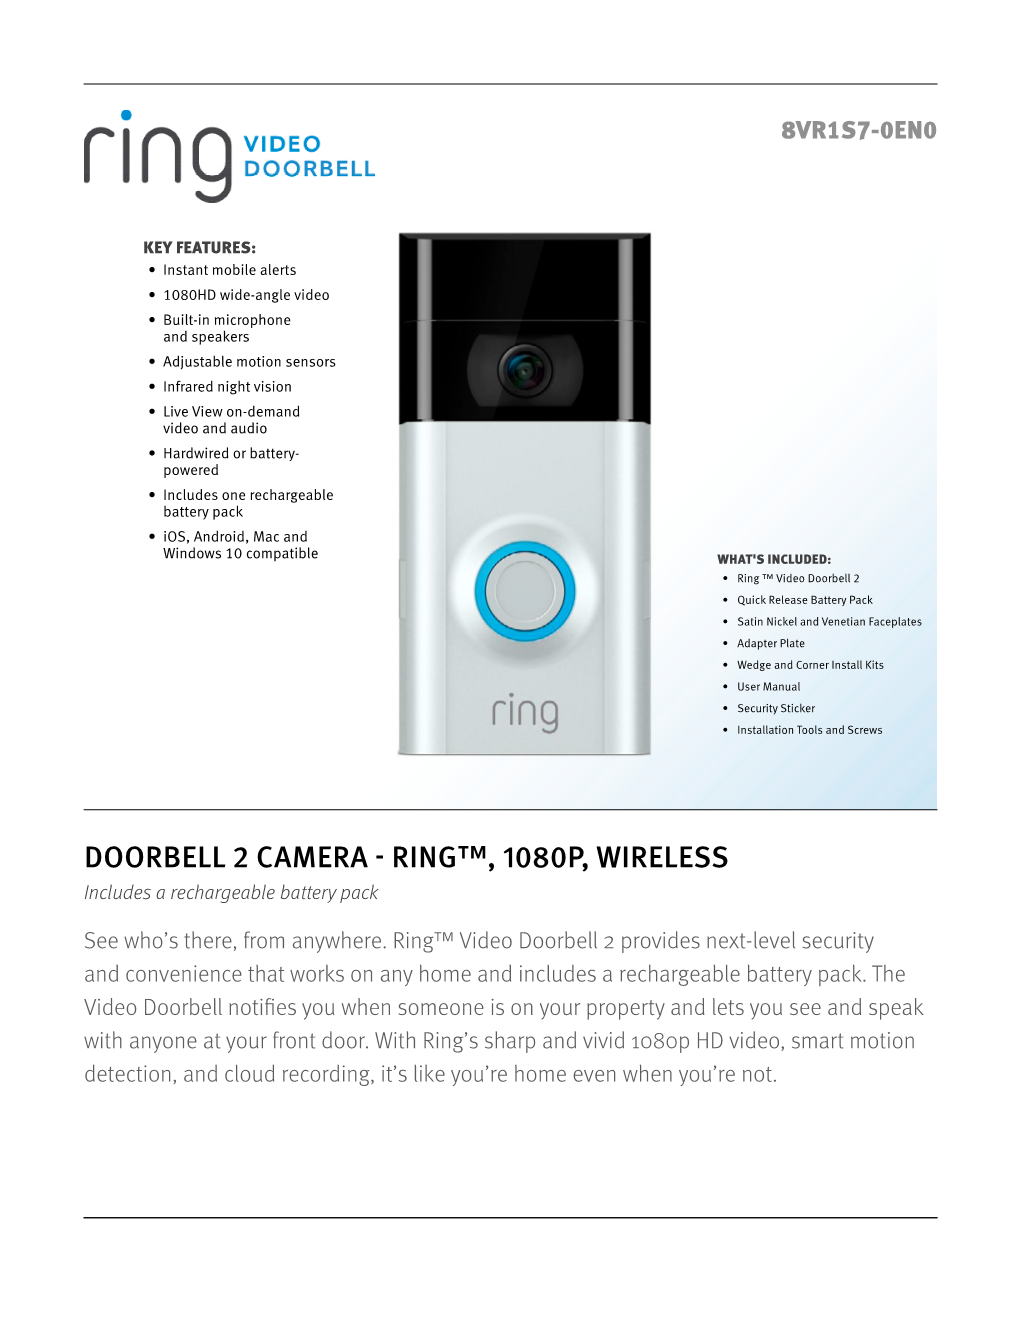 DOORBELL 2 CAMERA - RING™, 1080P, WIRELESS Includes a Rechargeable Battery Pack